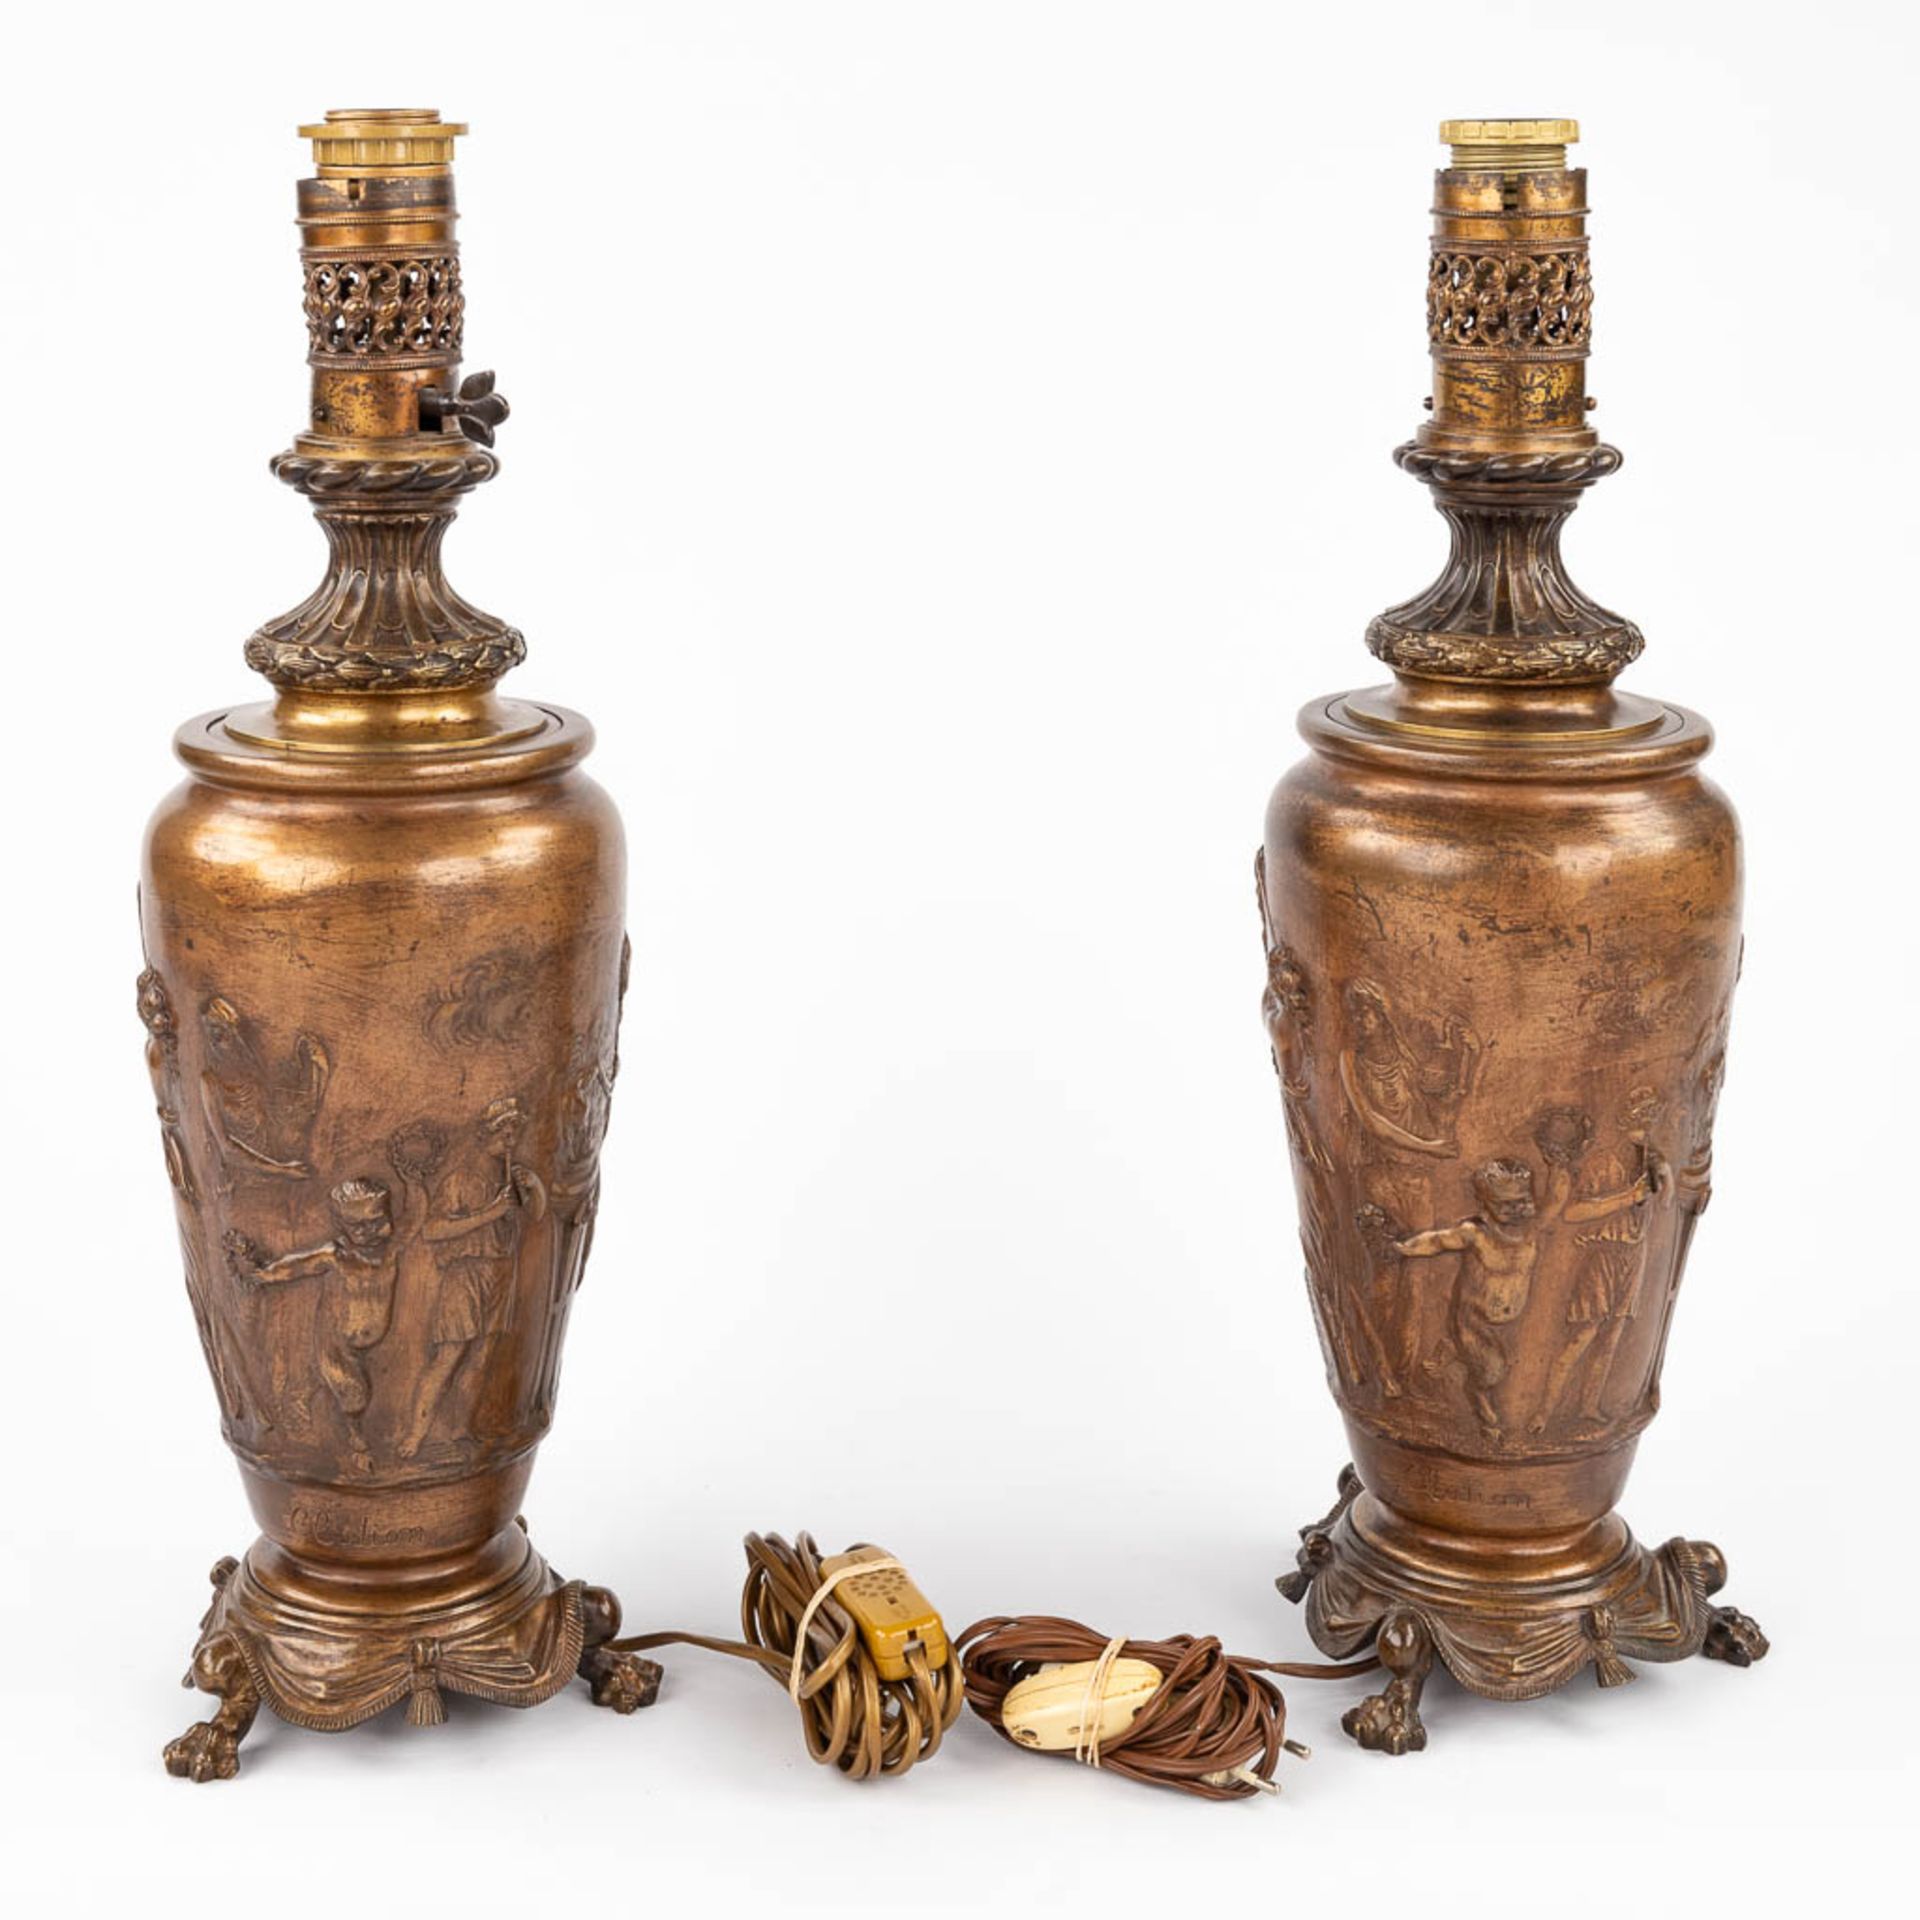 CLODION (1738-1814) 'Pair of oil lamps' bronze decorated with Satyrs and Nymphs. 19th C. (H:55 x D:1 - Bild 7 aus 14